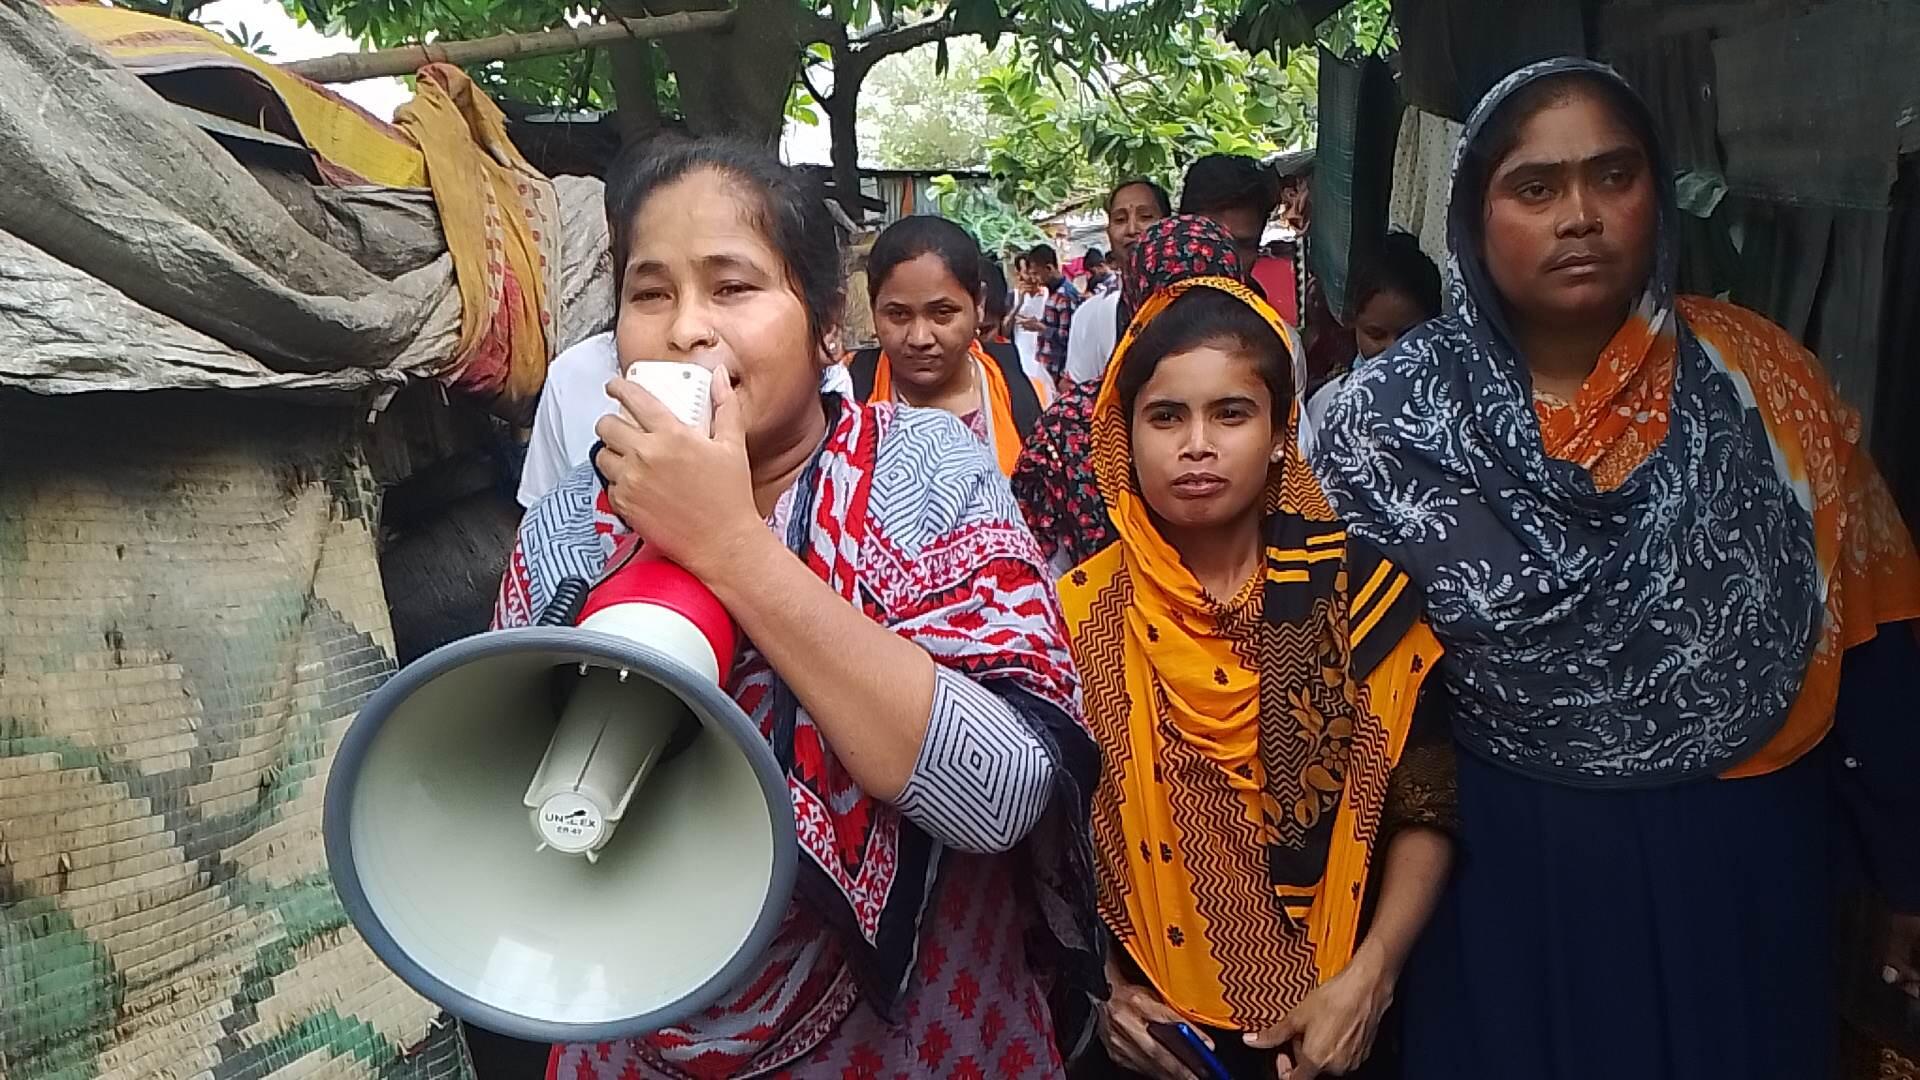 A woman shouts into a megaphone as she and others move through a group of makeshift shelters.